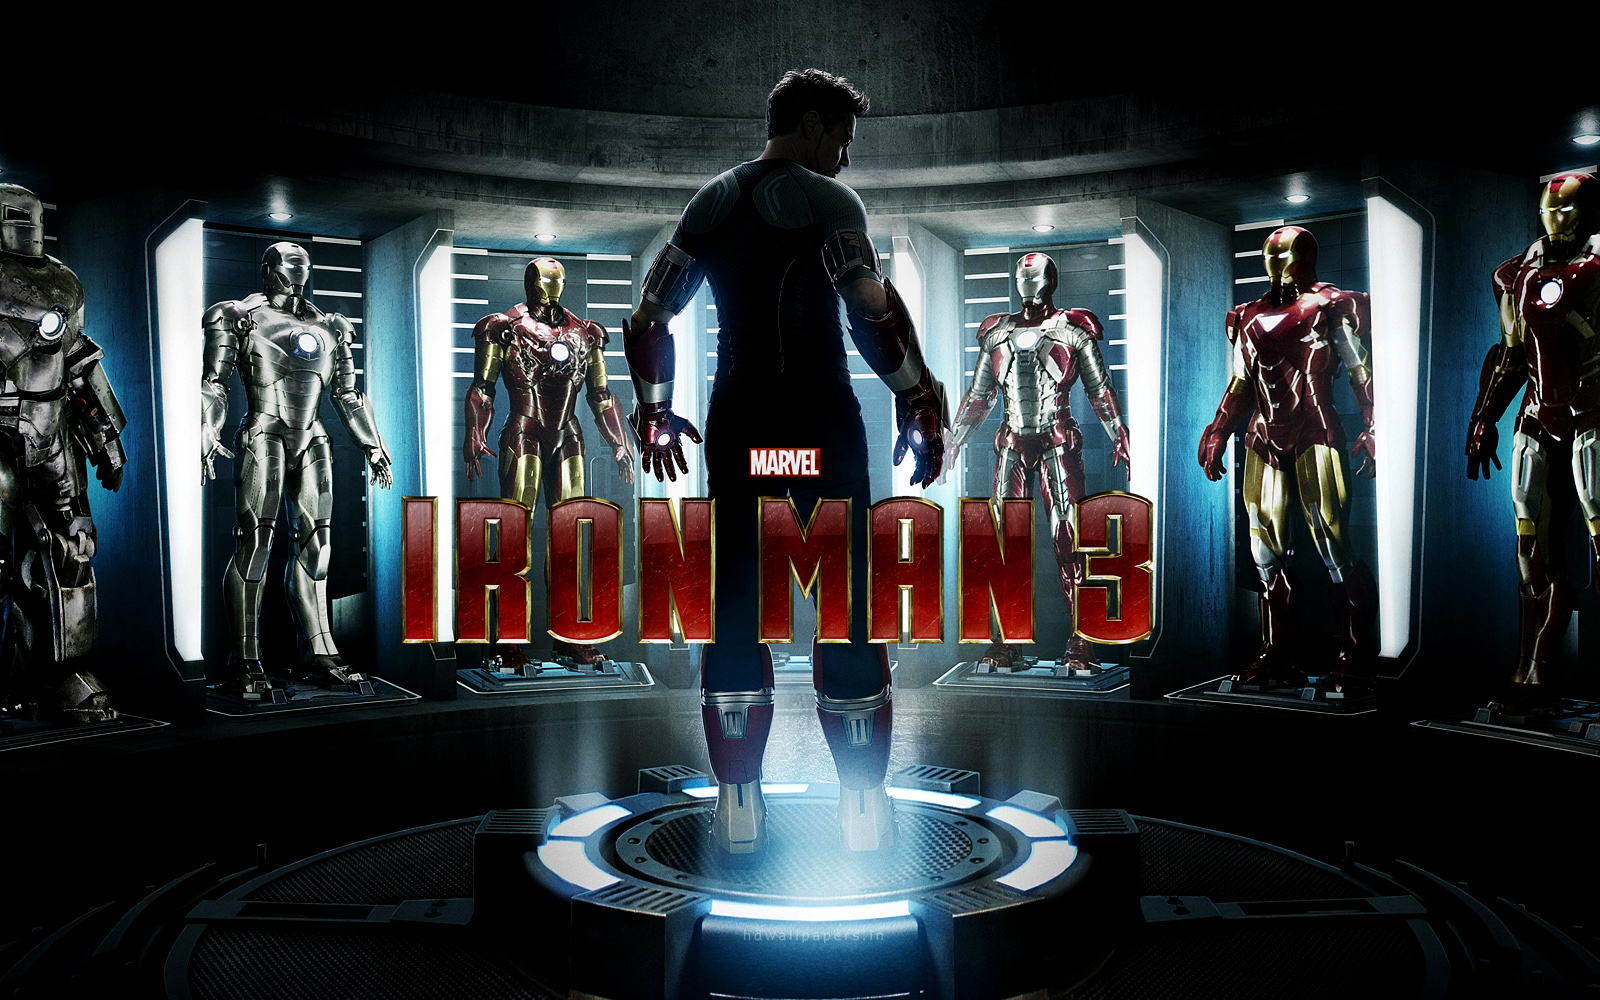 Iron Man Movie HD Wallpaper And Poster